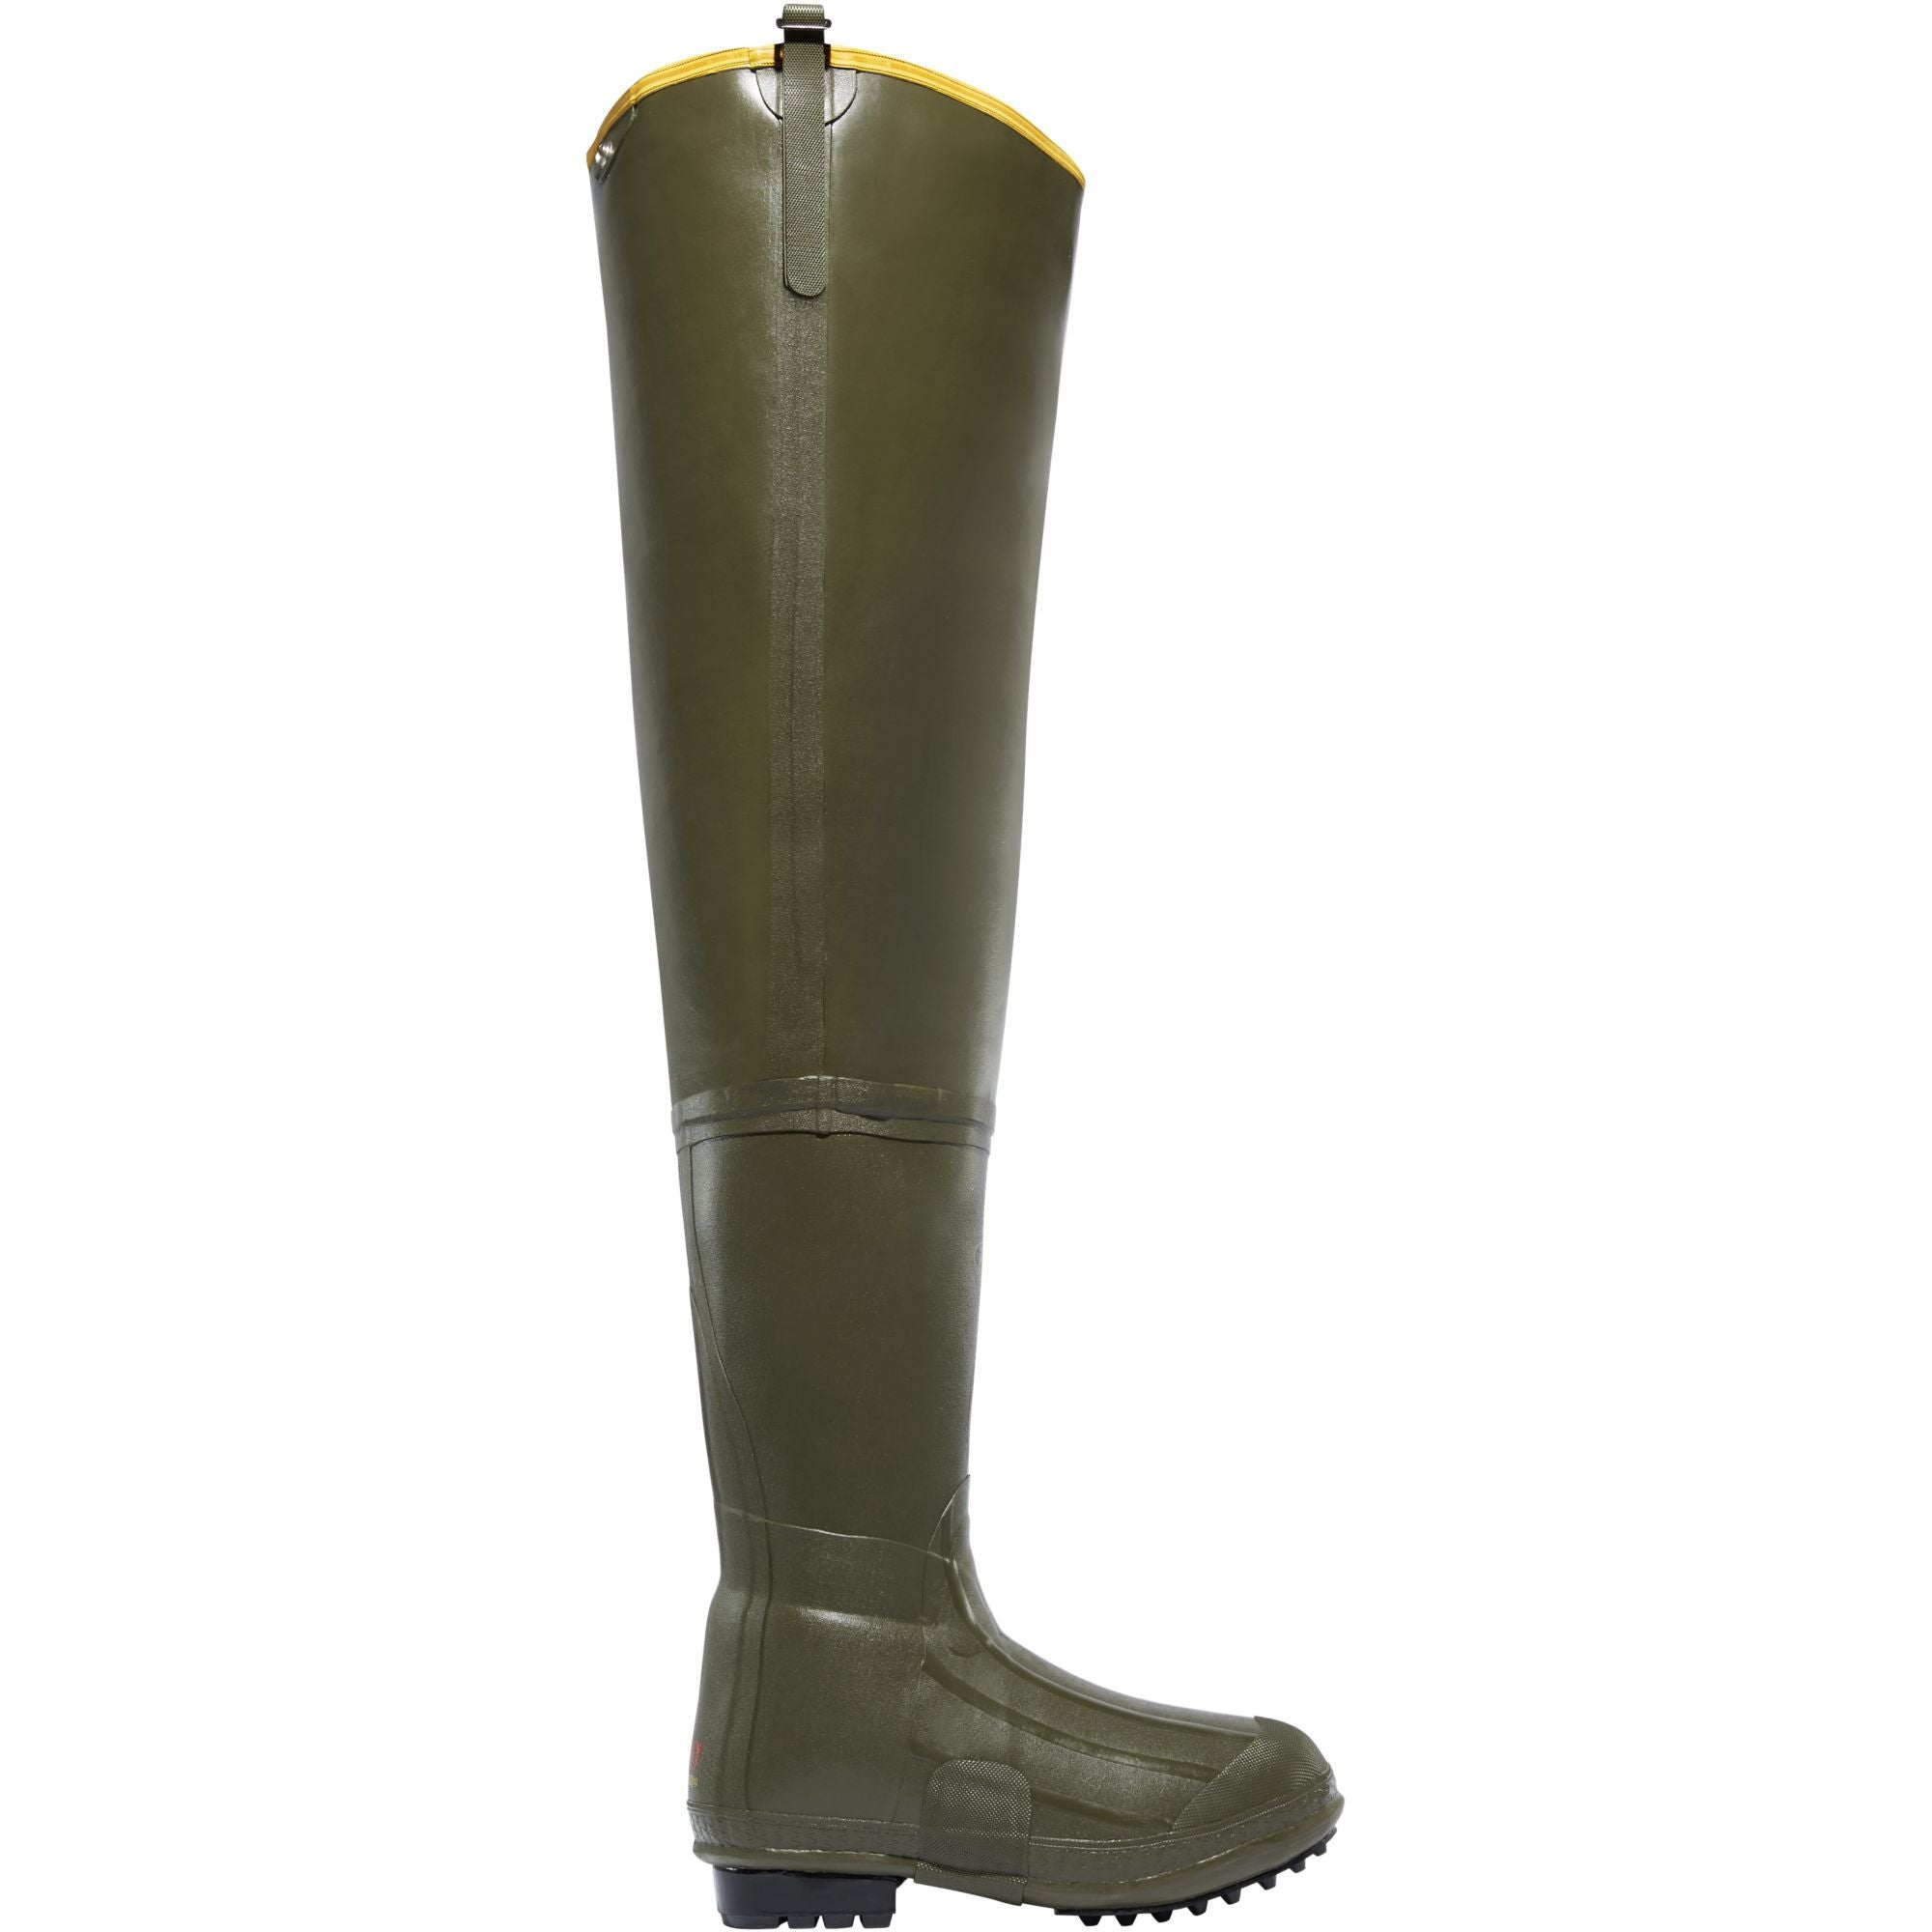 LaCrosse Men's Big Chief 32" OD Ins Rubber Work Boot - Green - 700001 7 / Green - Overlook Boots